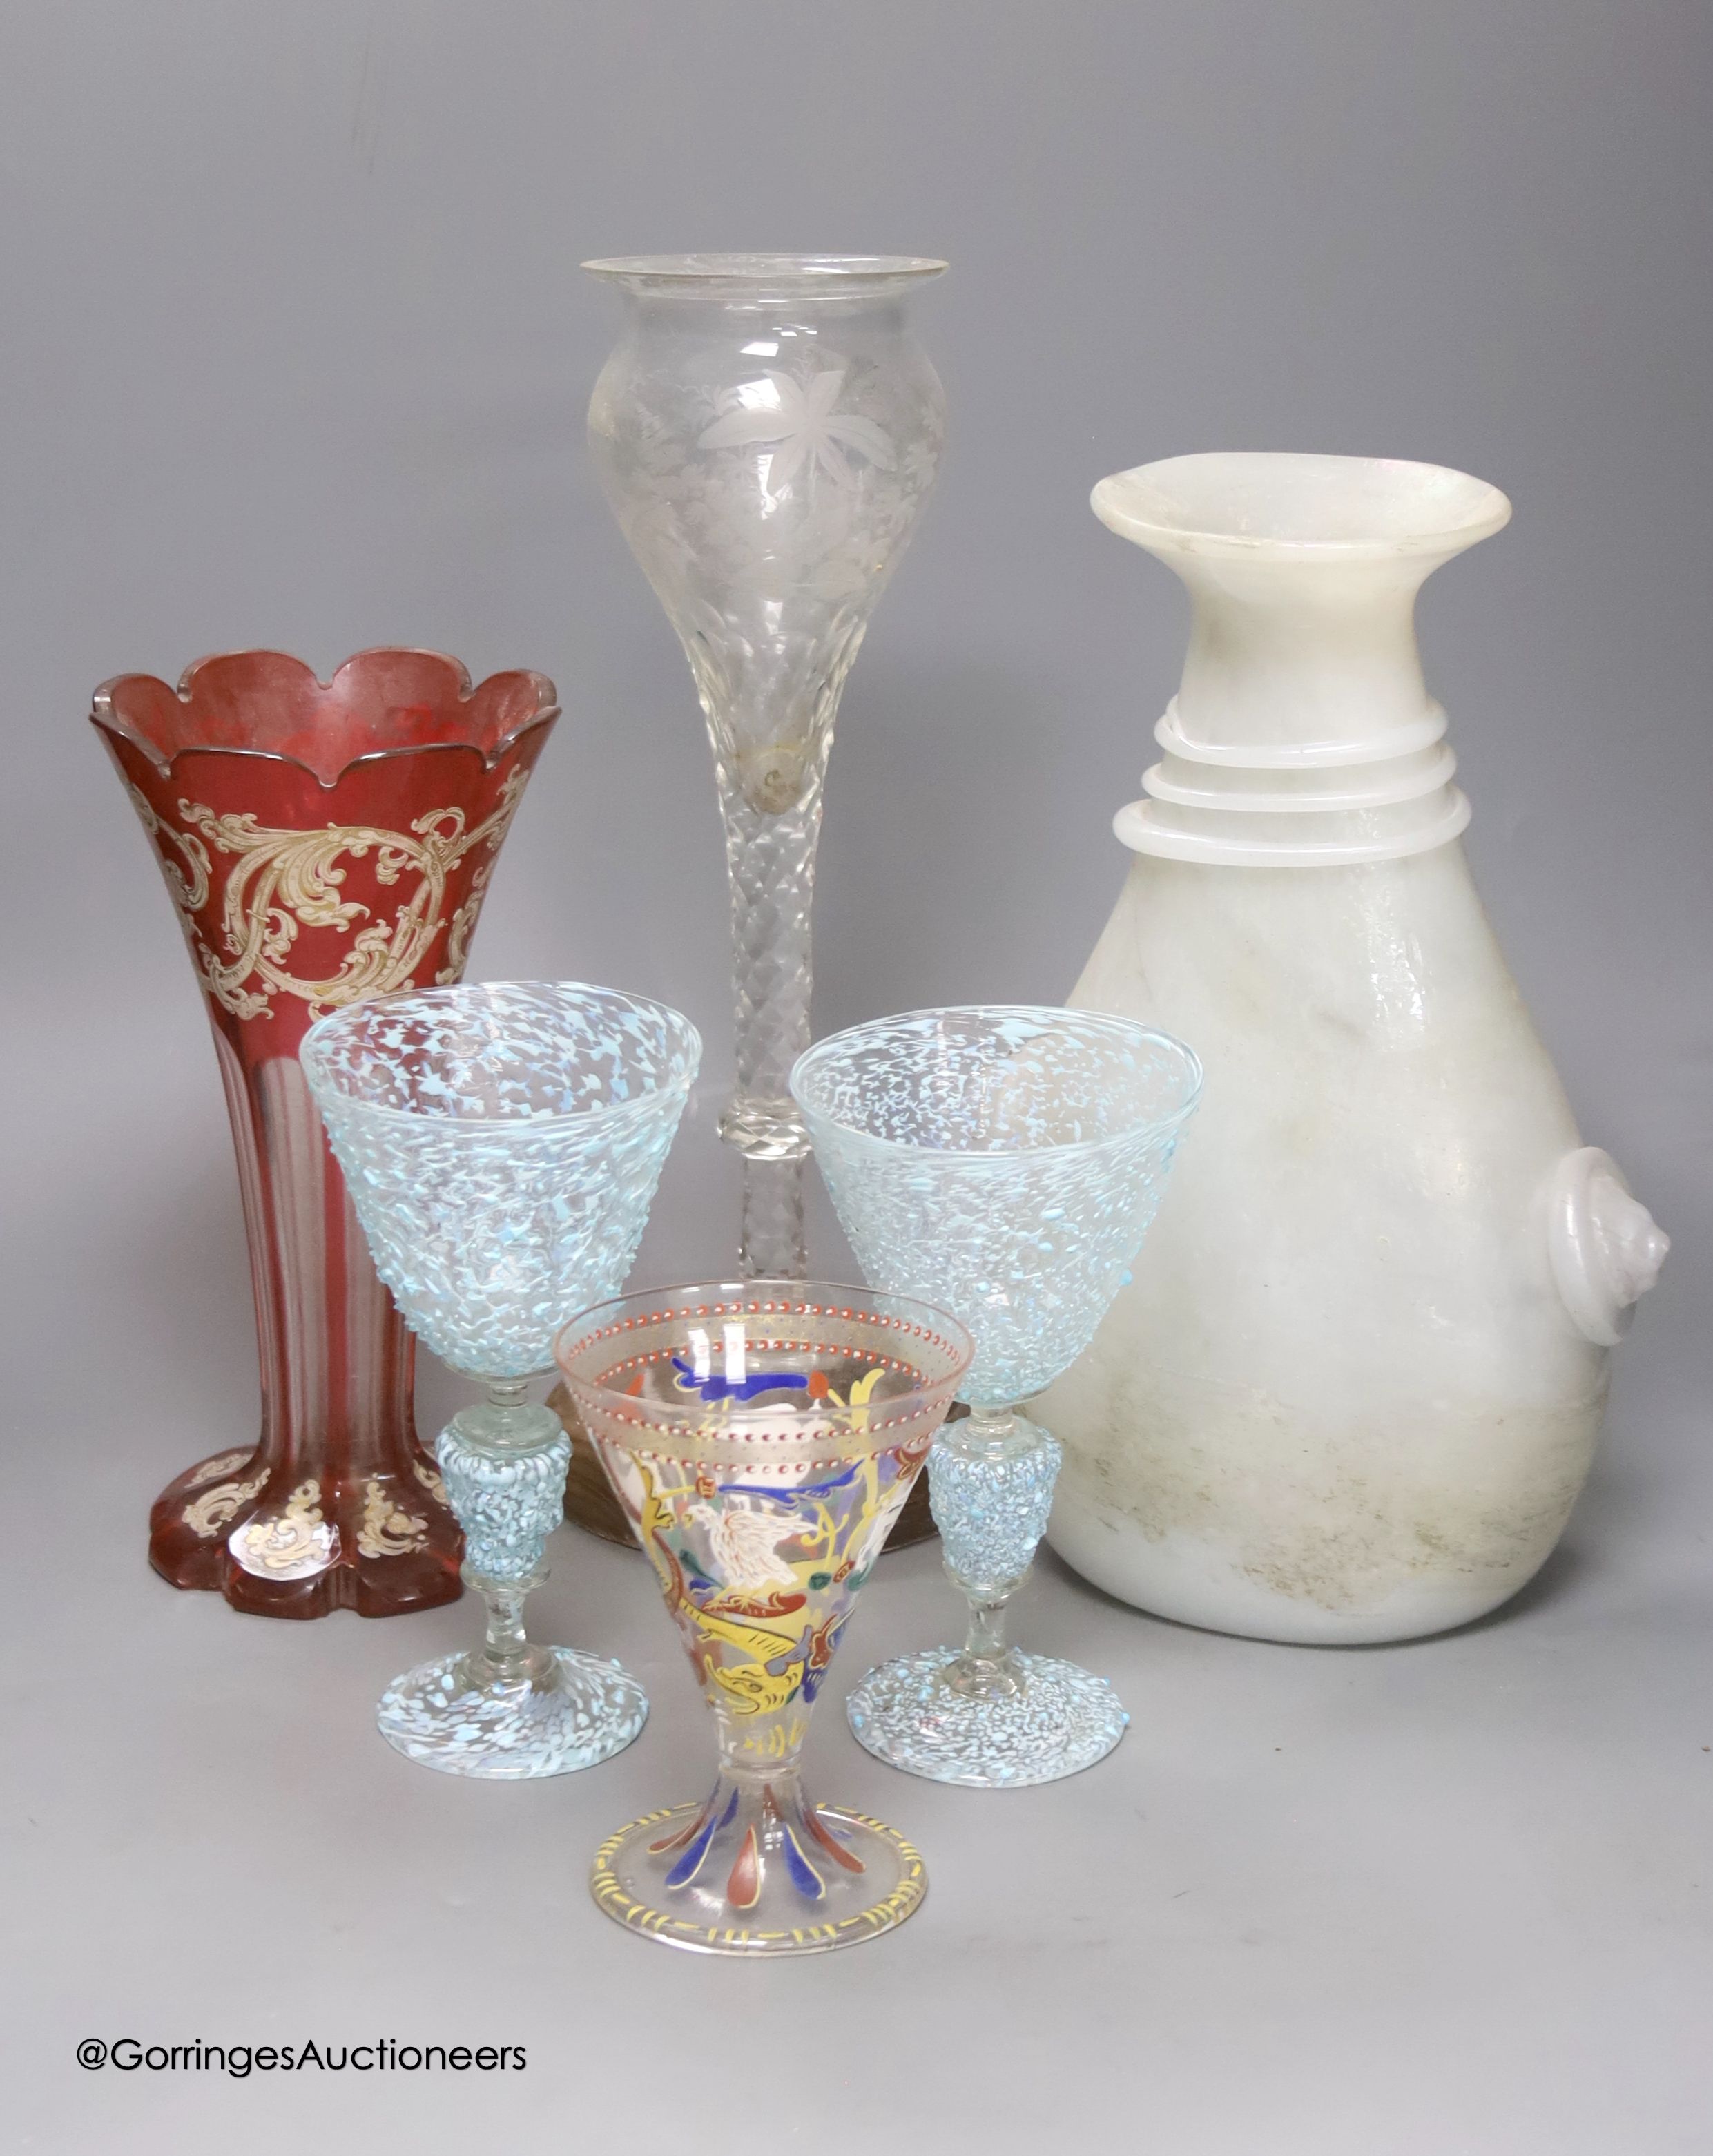 Roman style vase, a pair of goblets, a Bohemian trumpet vase, cut glass vase on stand and a German enamel tinted glass